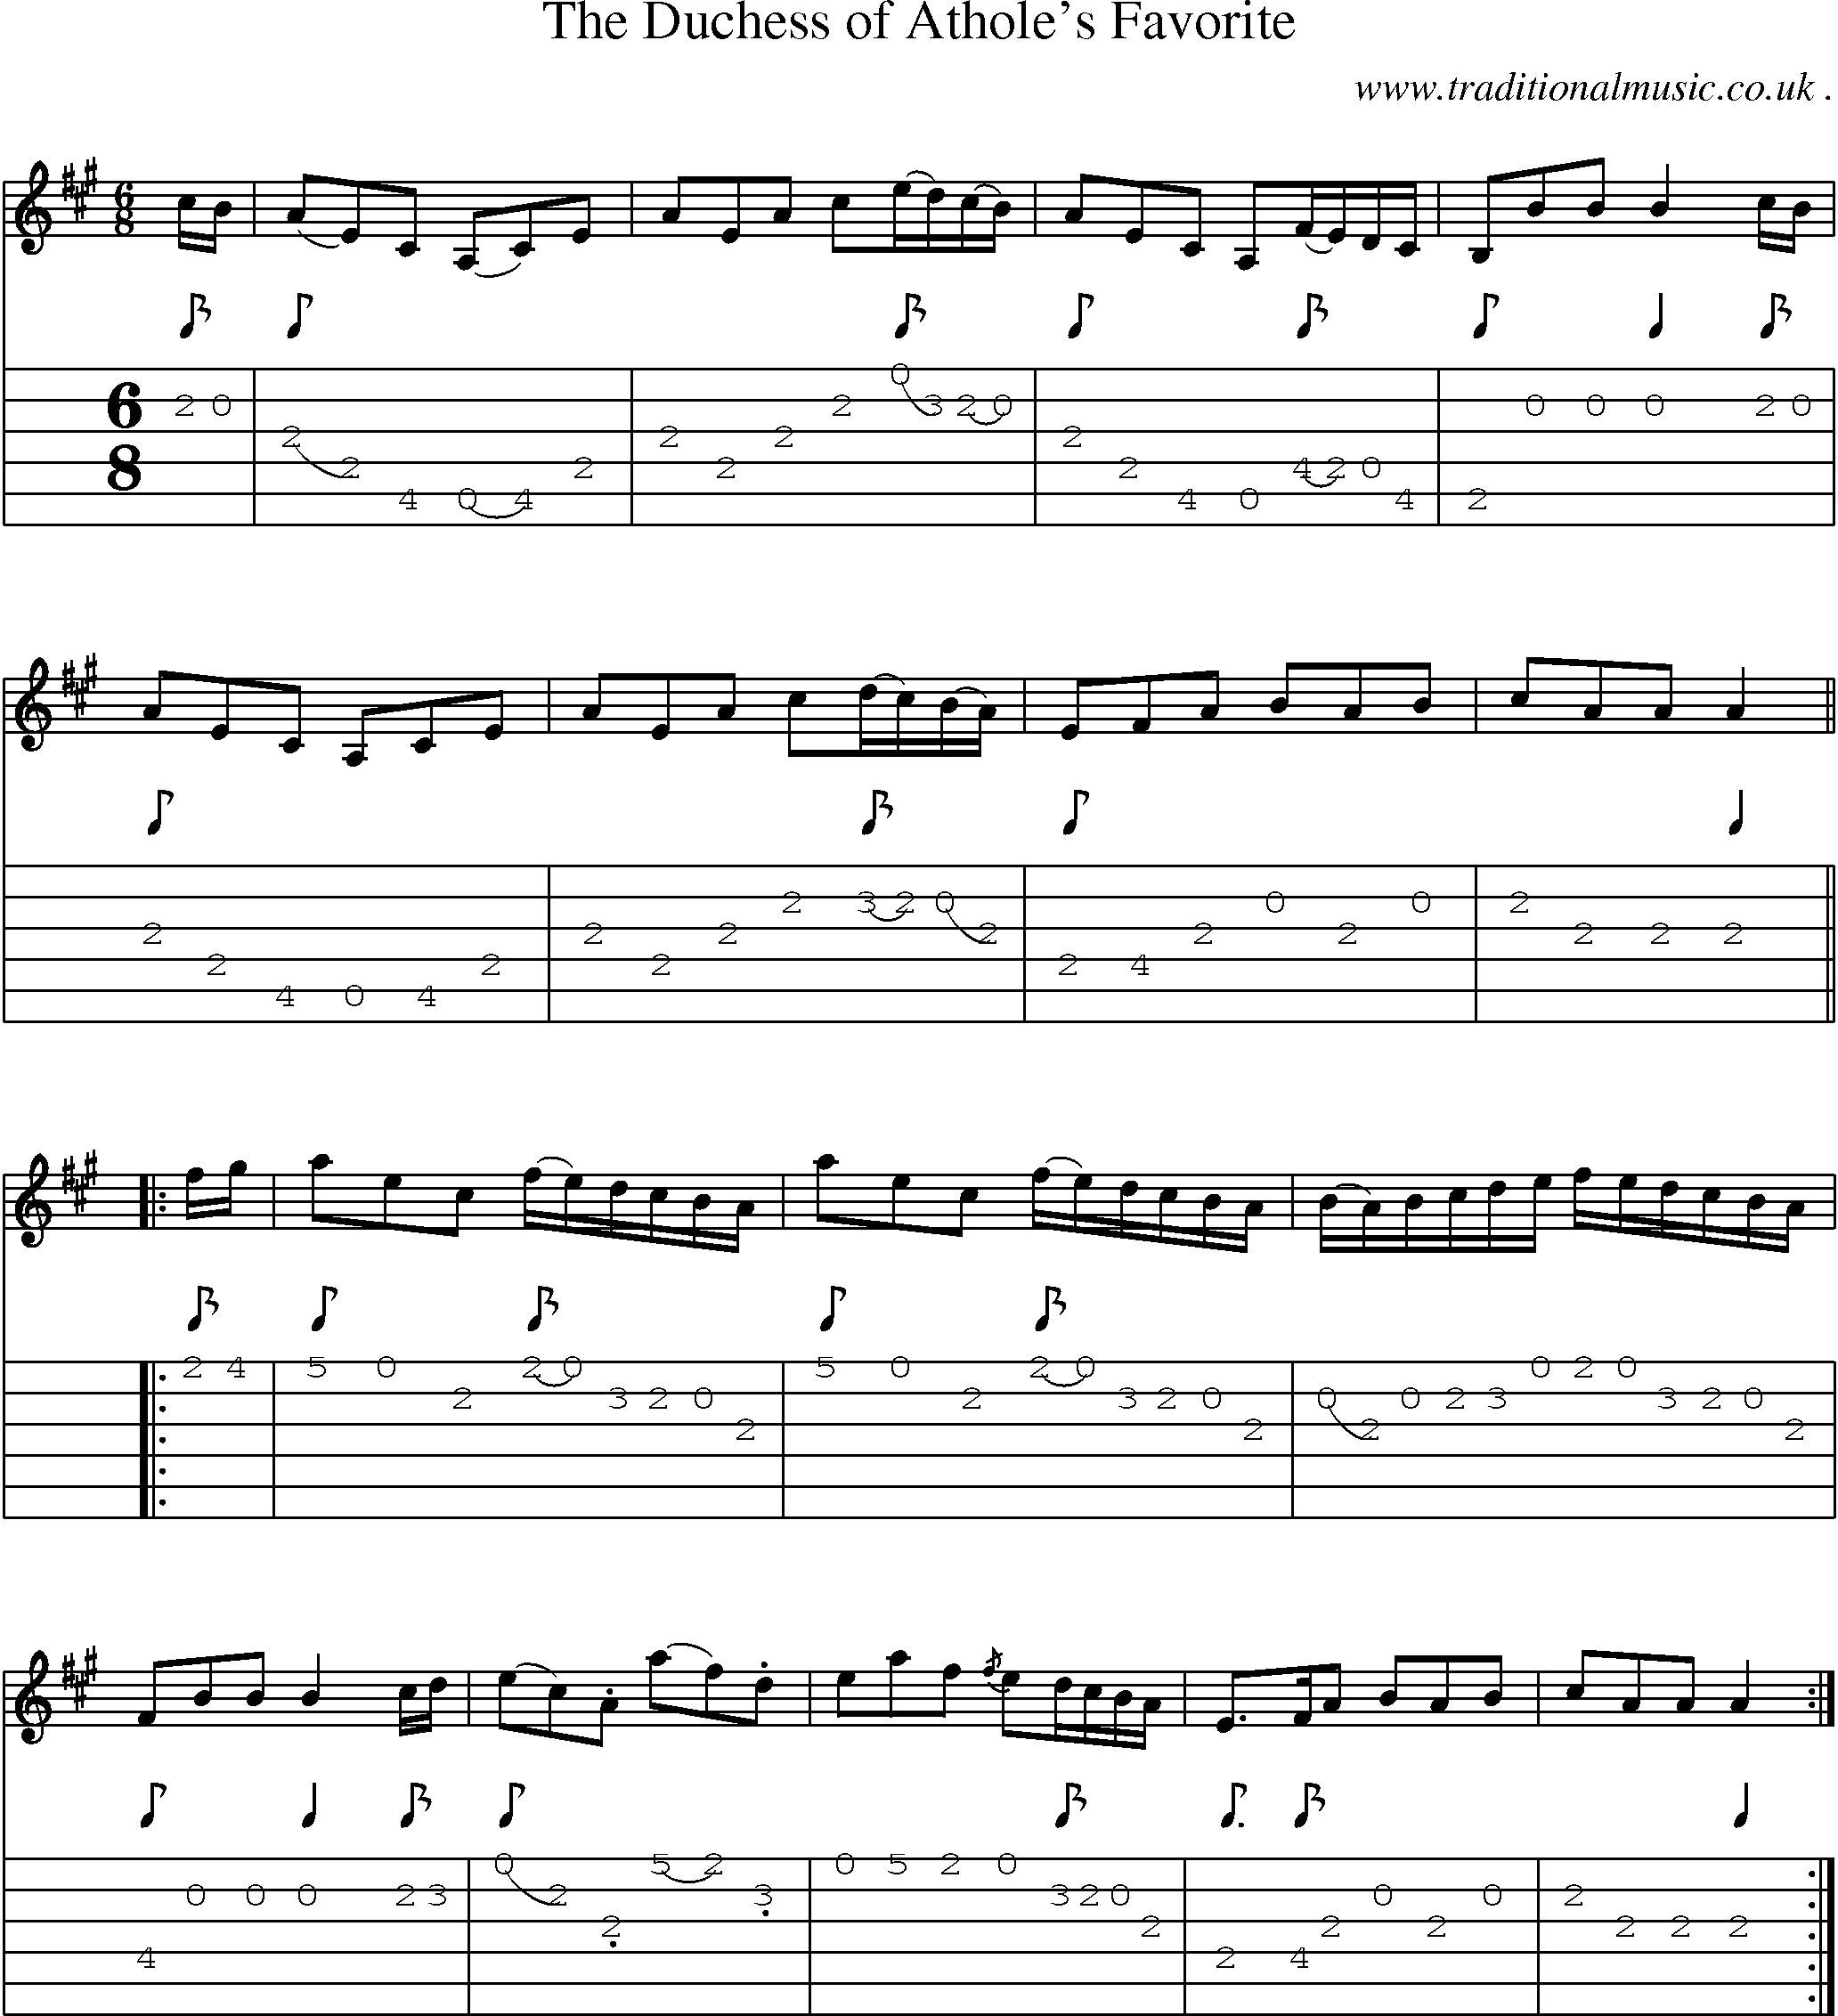 Sheet-music  score, Chords and Guitar Tabs for The Duchess Of Atholes Favorite